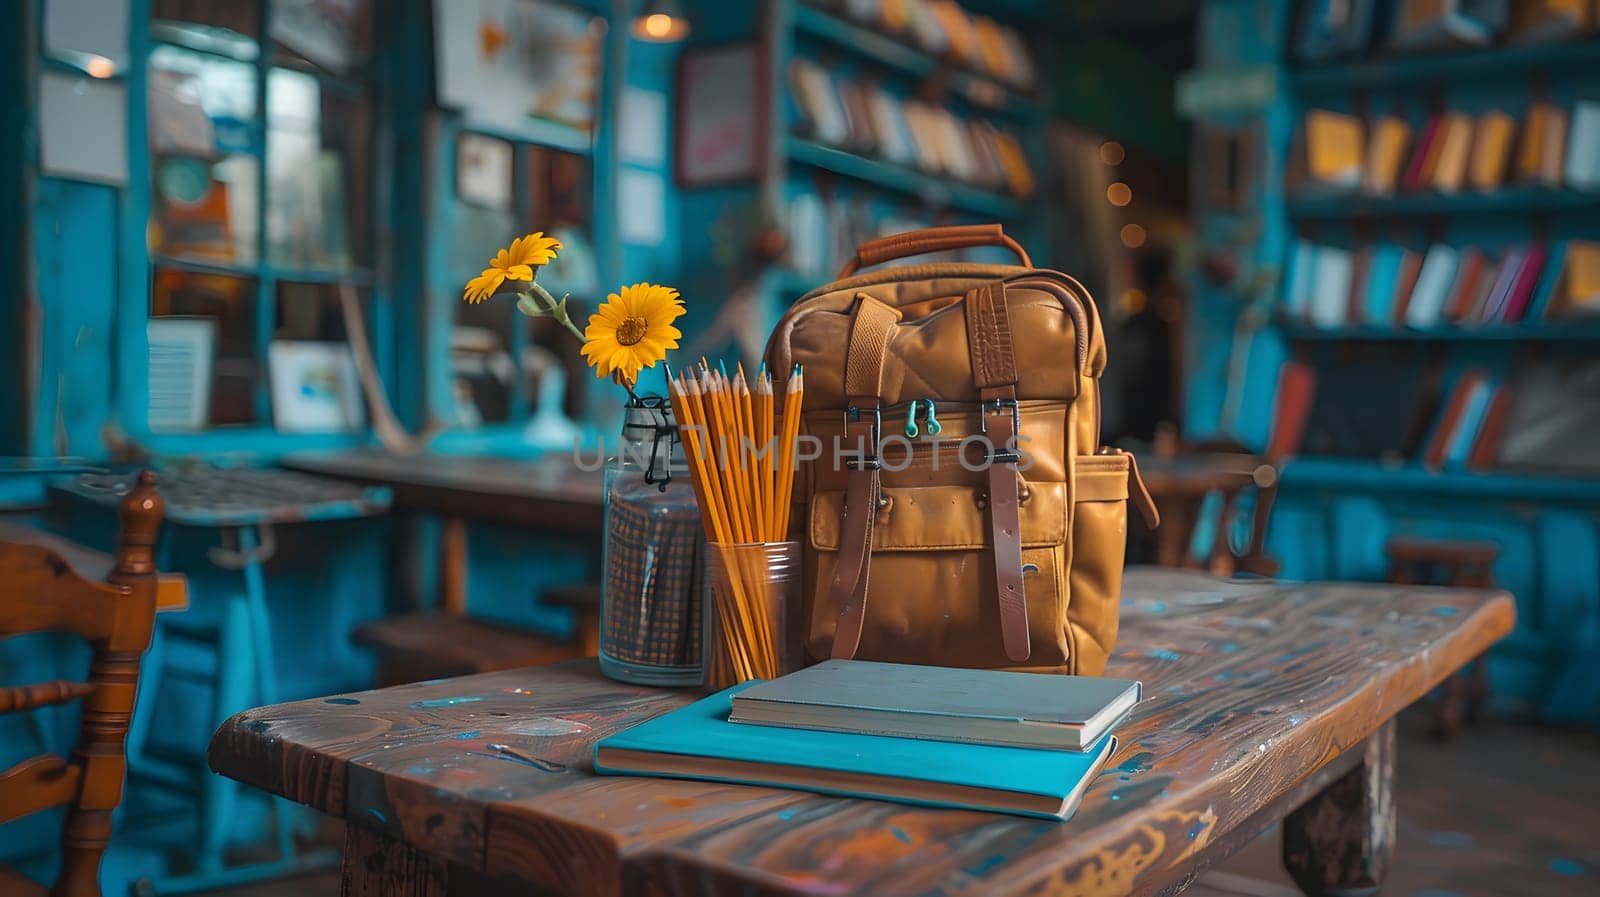 An electric blue backpack rests on a wooden library table by Nadtochiy